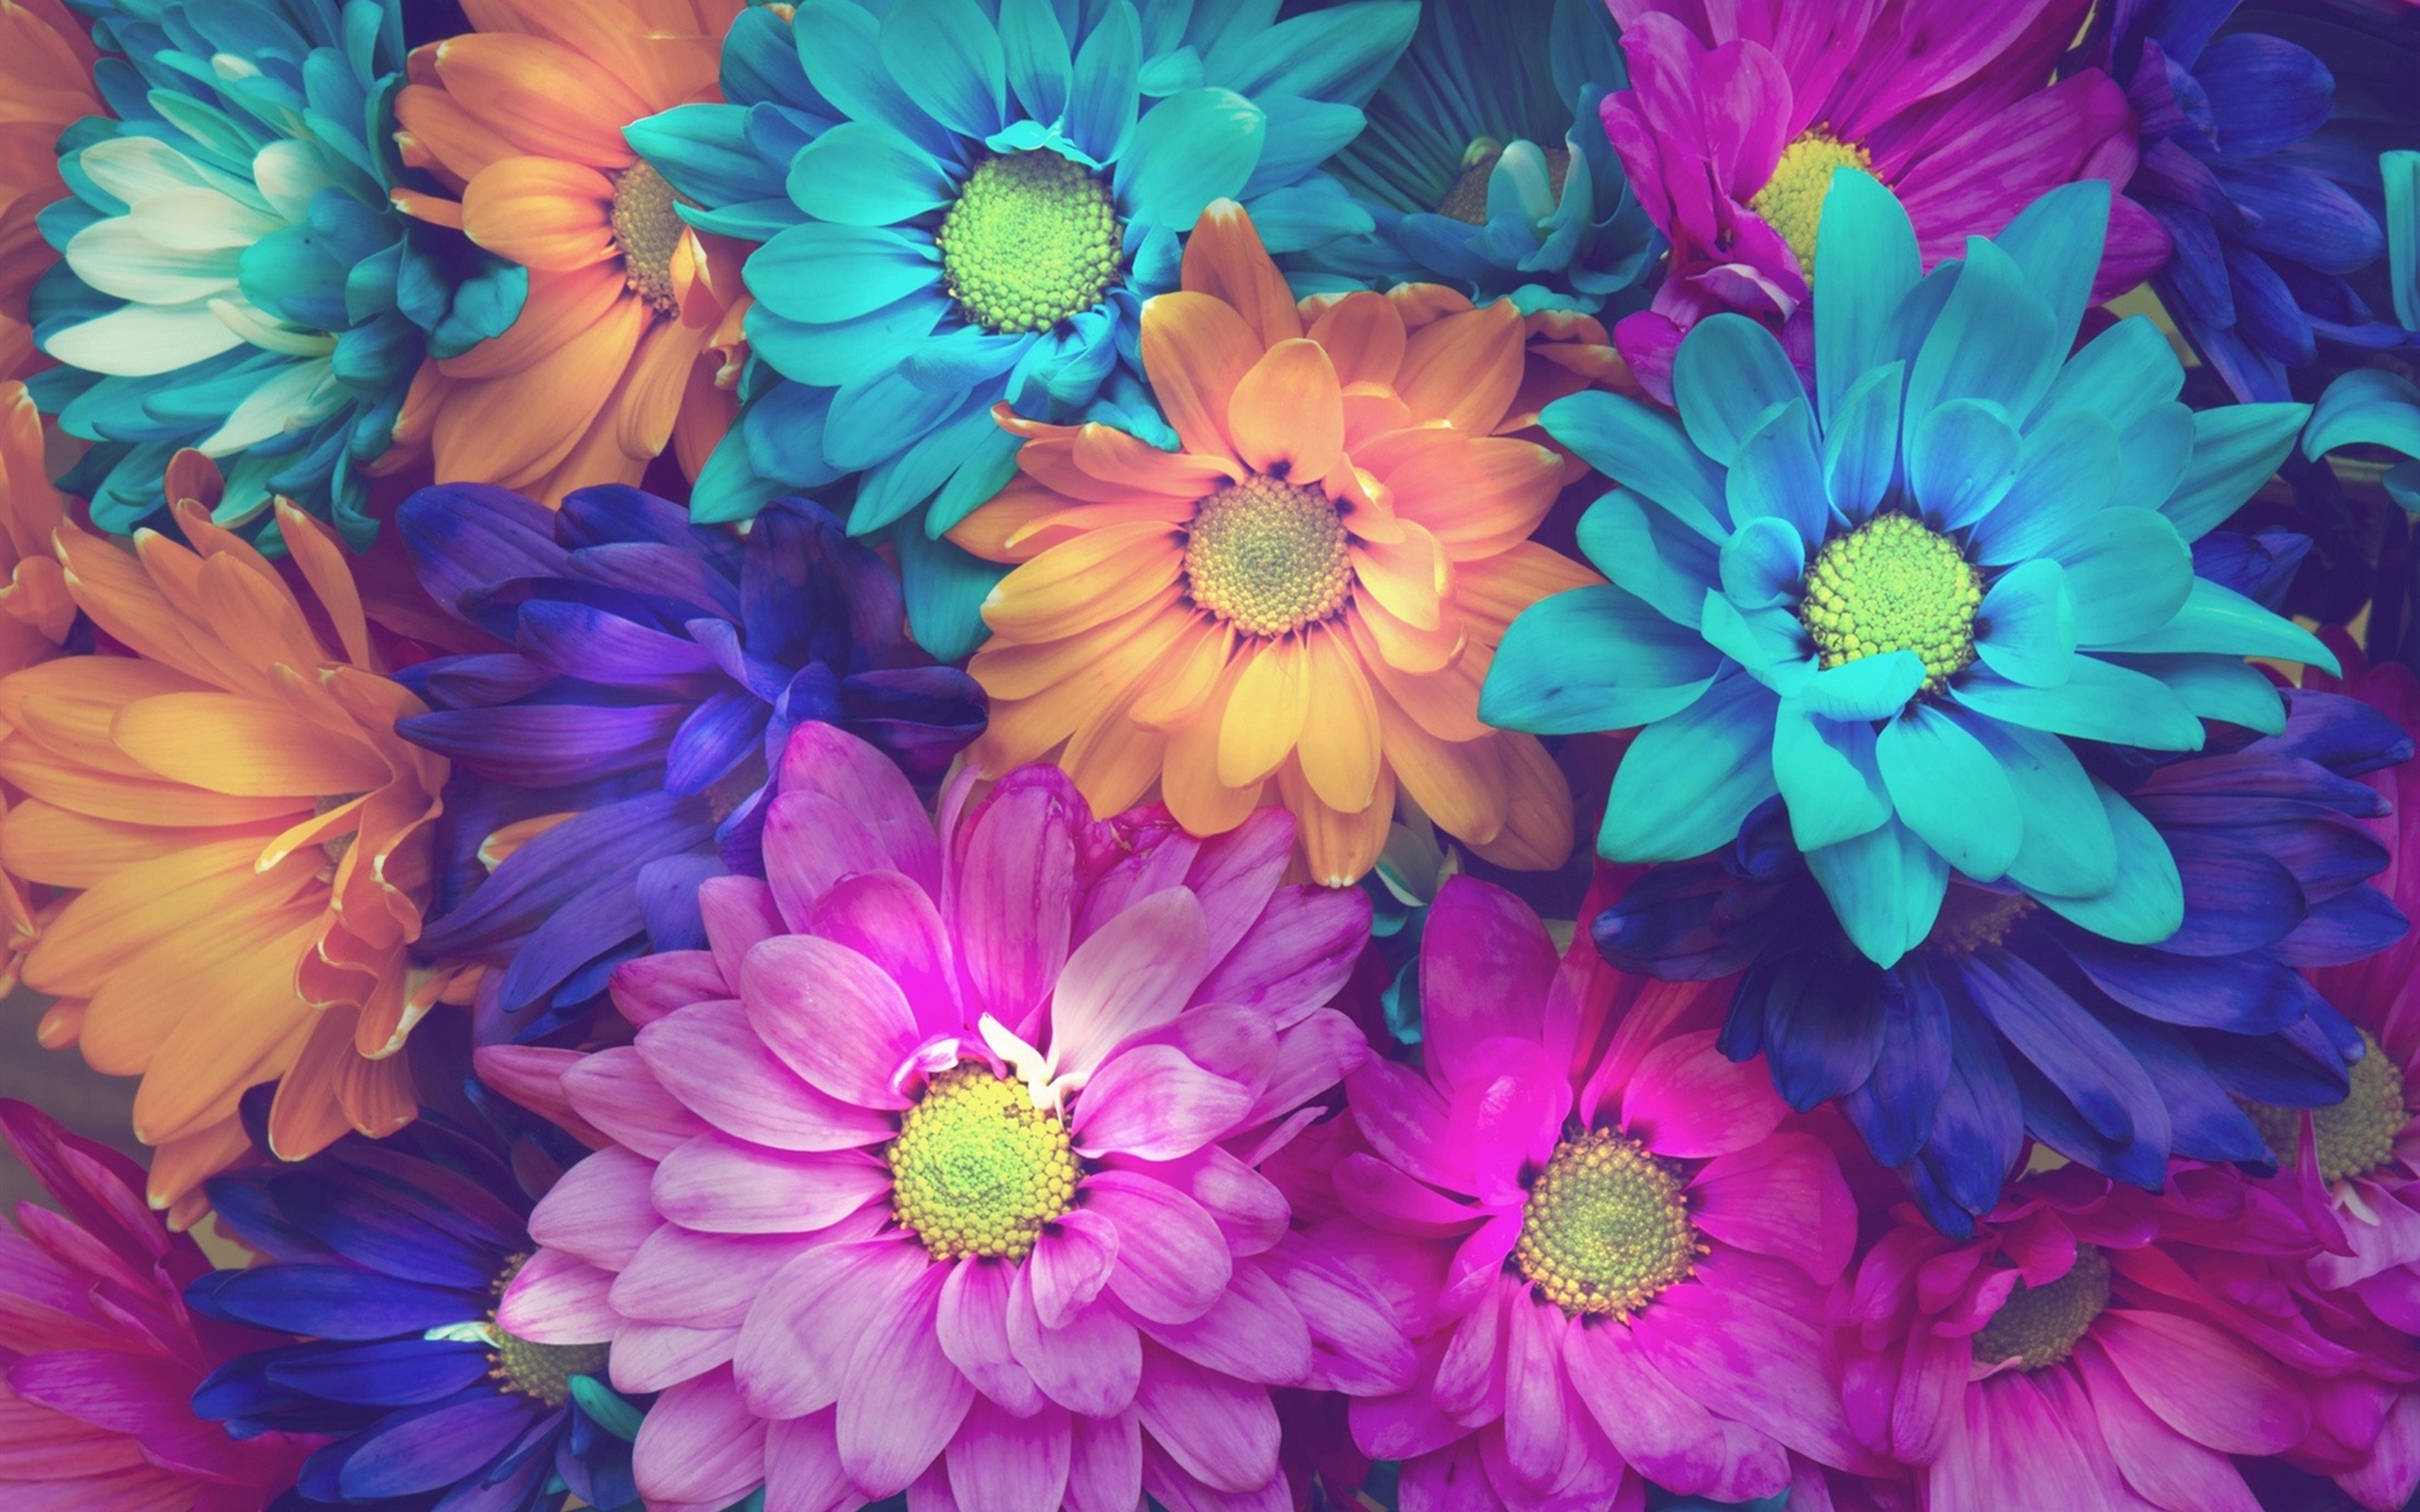 Colorful Daisy Flowers Pink Blue Orange Background Wallpaper 2560x1600 Wallpapers13 Com